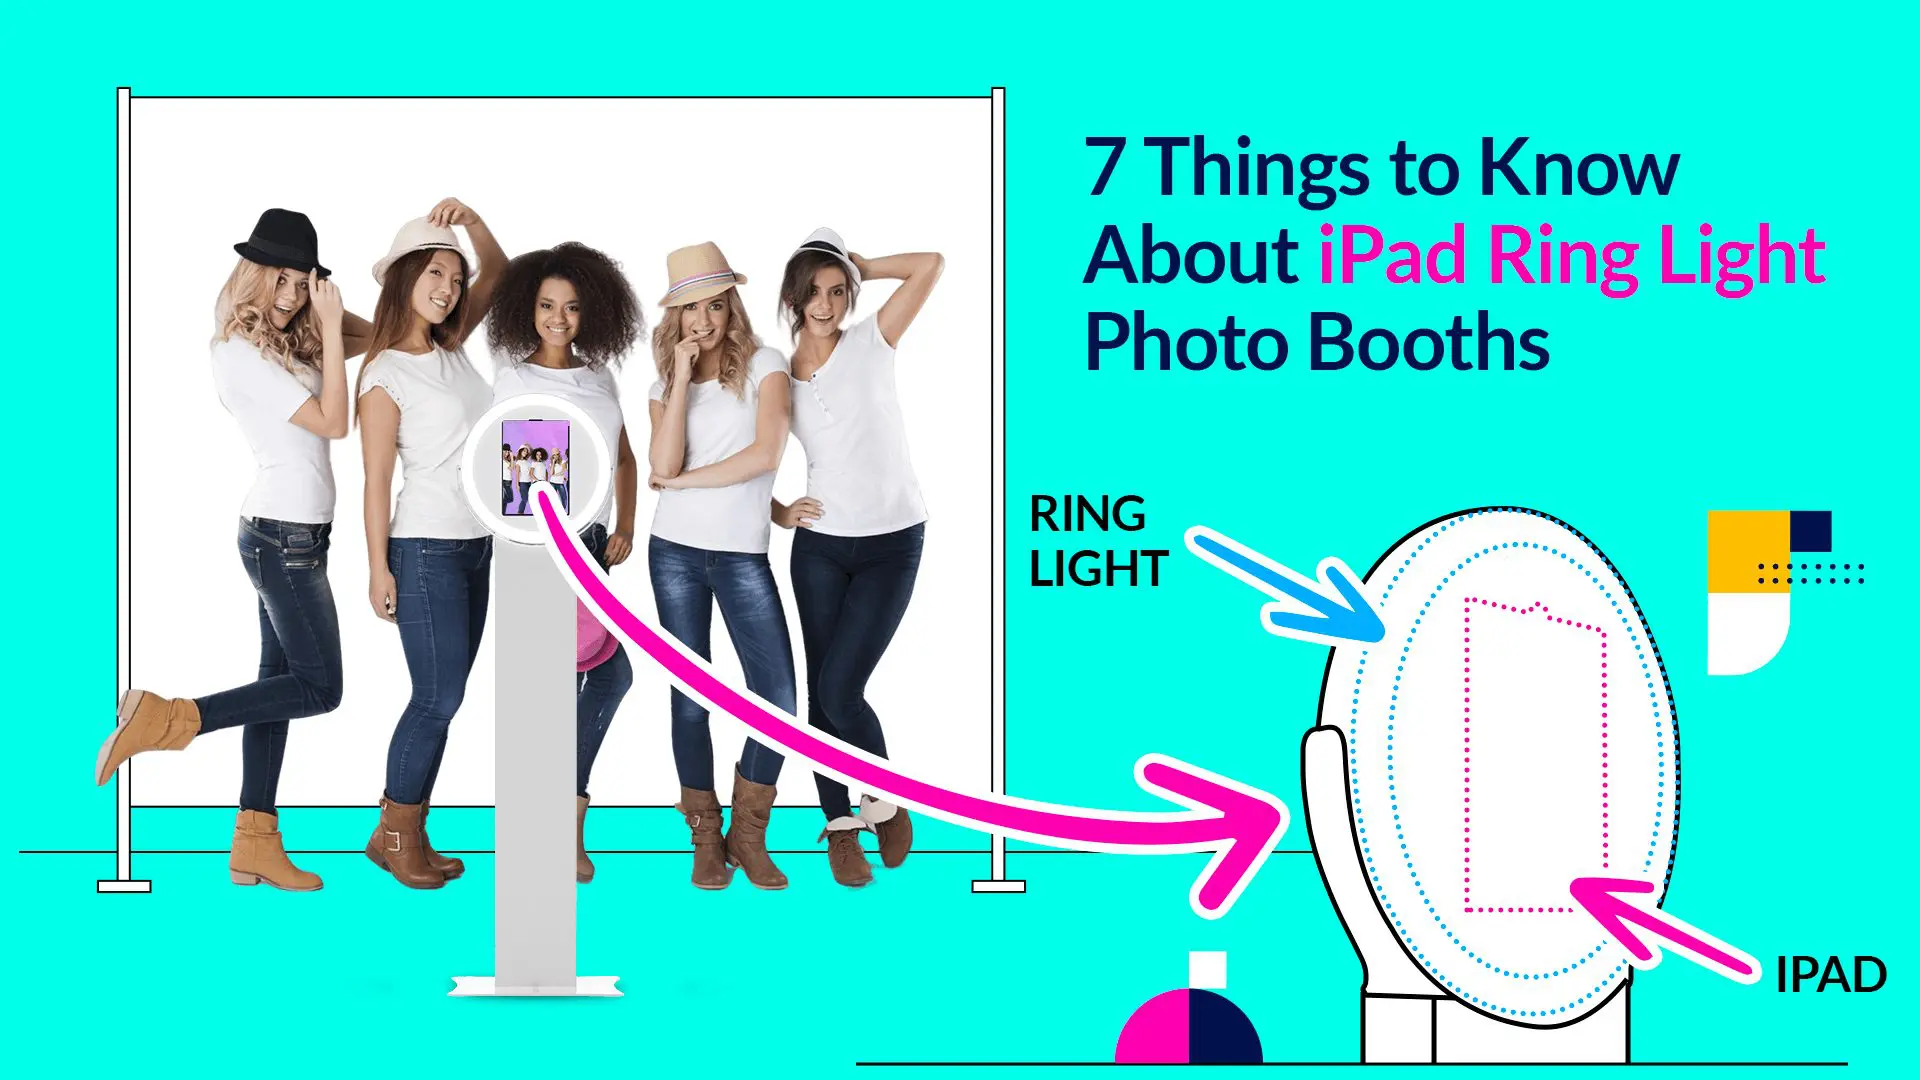 7 things to know about ipad ring light photo booths